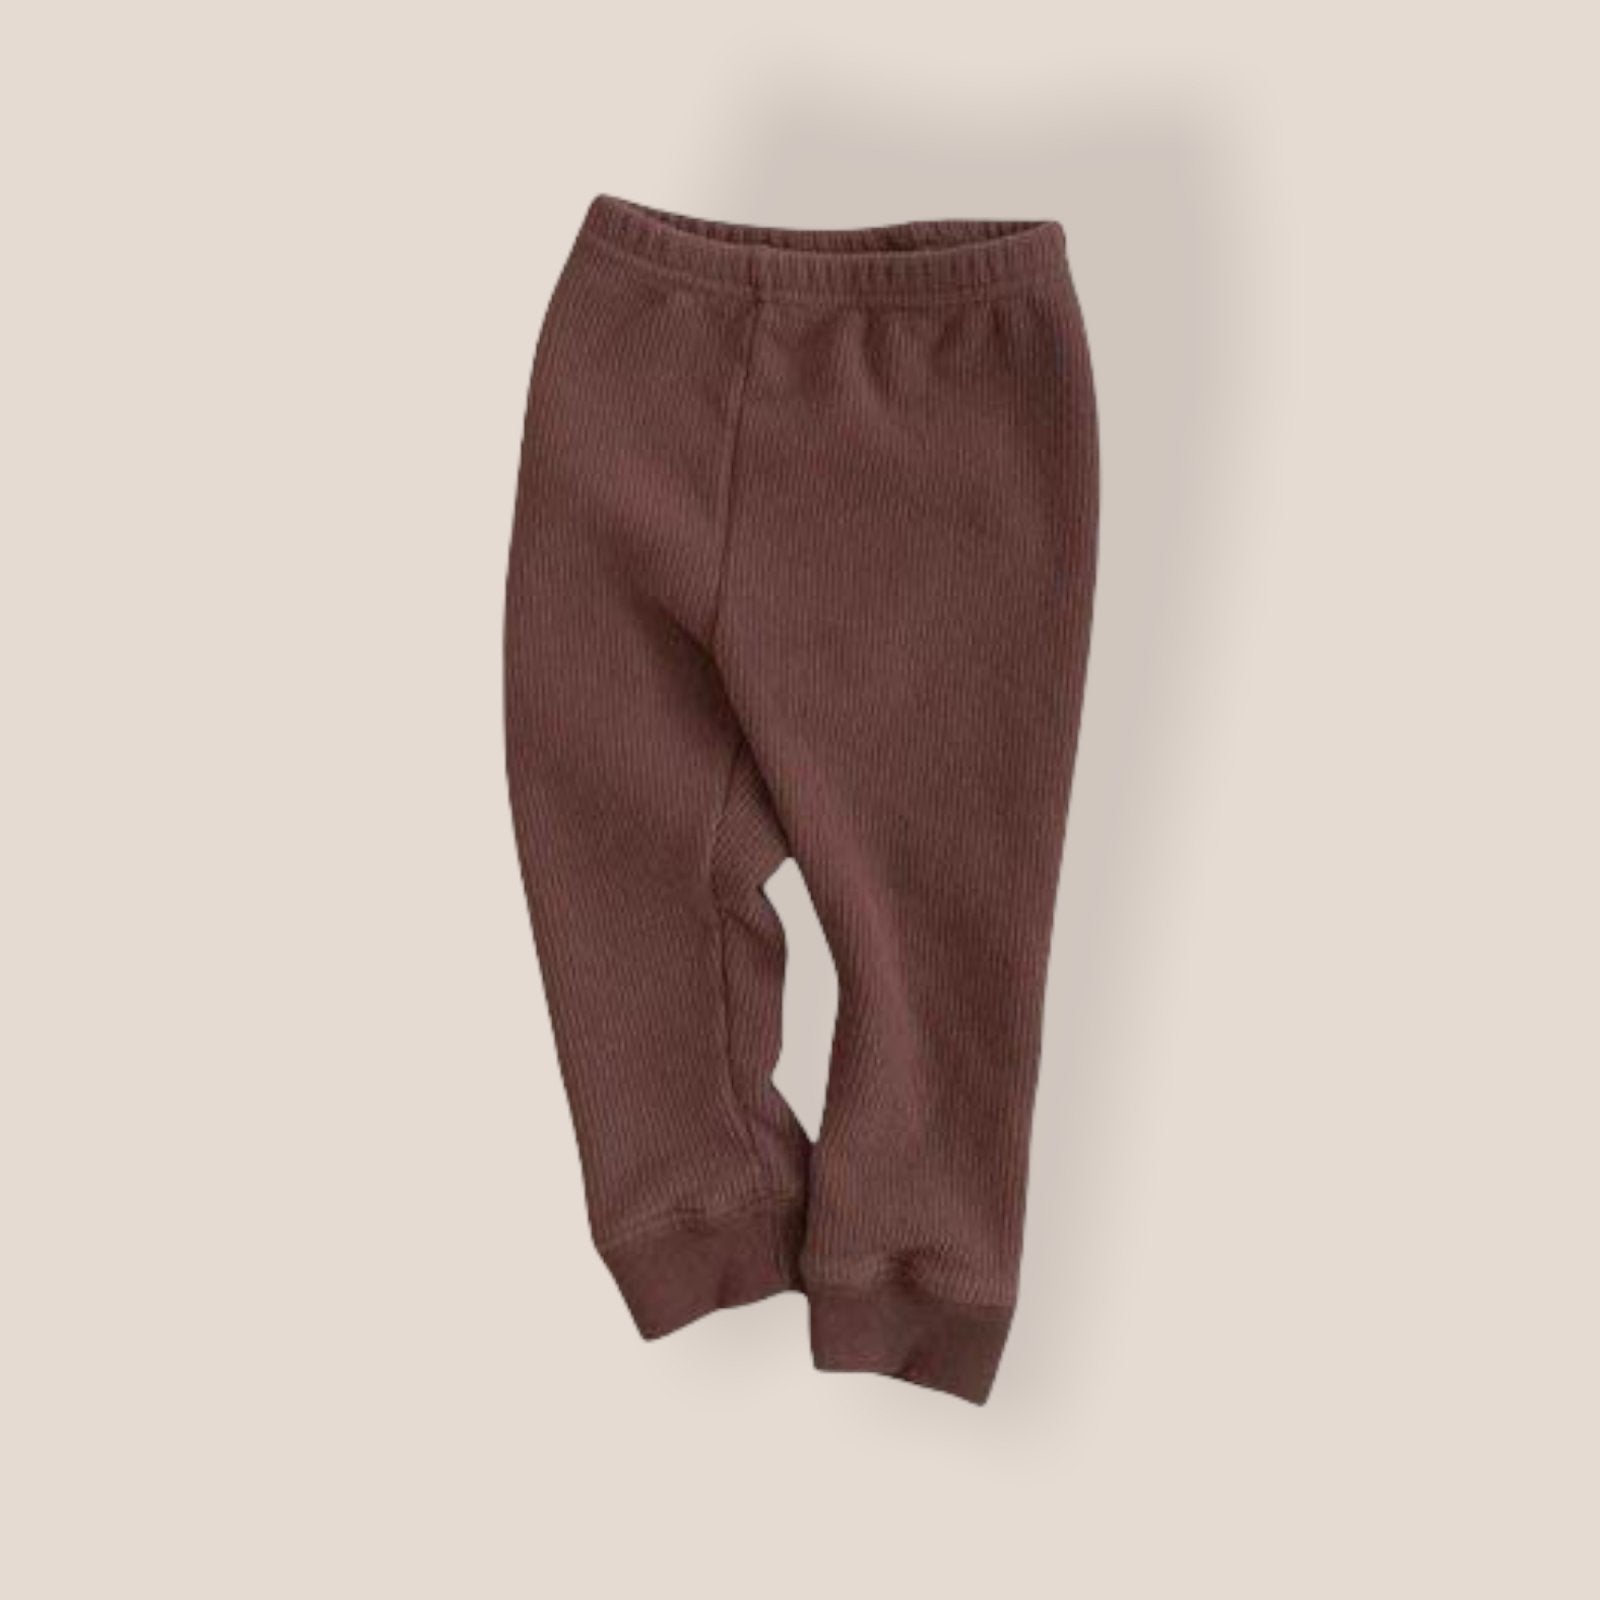 Mini Rib Leggings find Stylish Fashion for Little People- at Little Foxx Concept Store